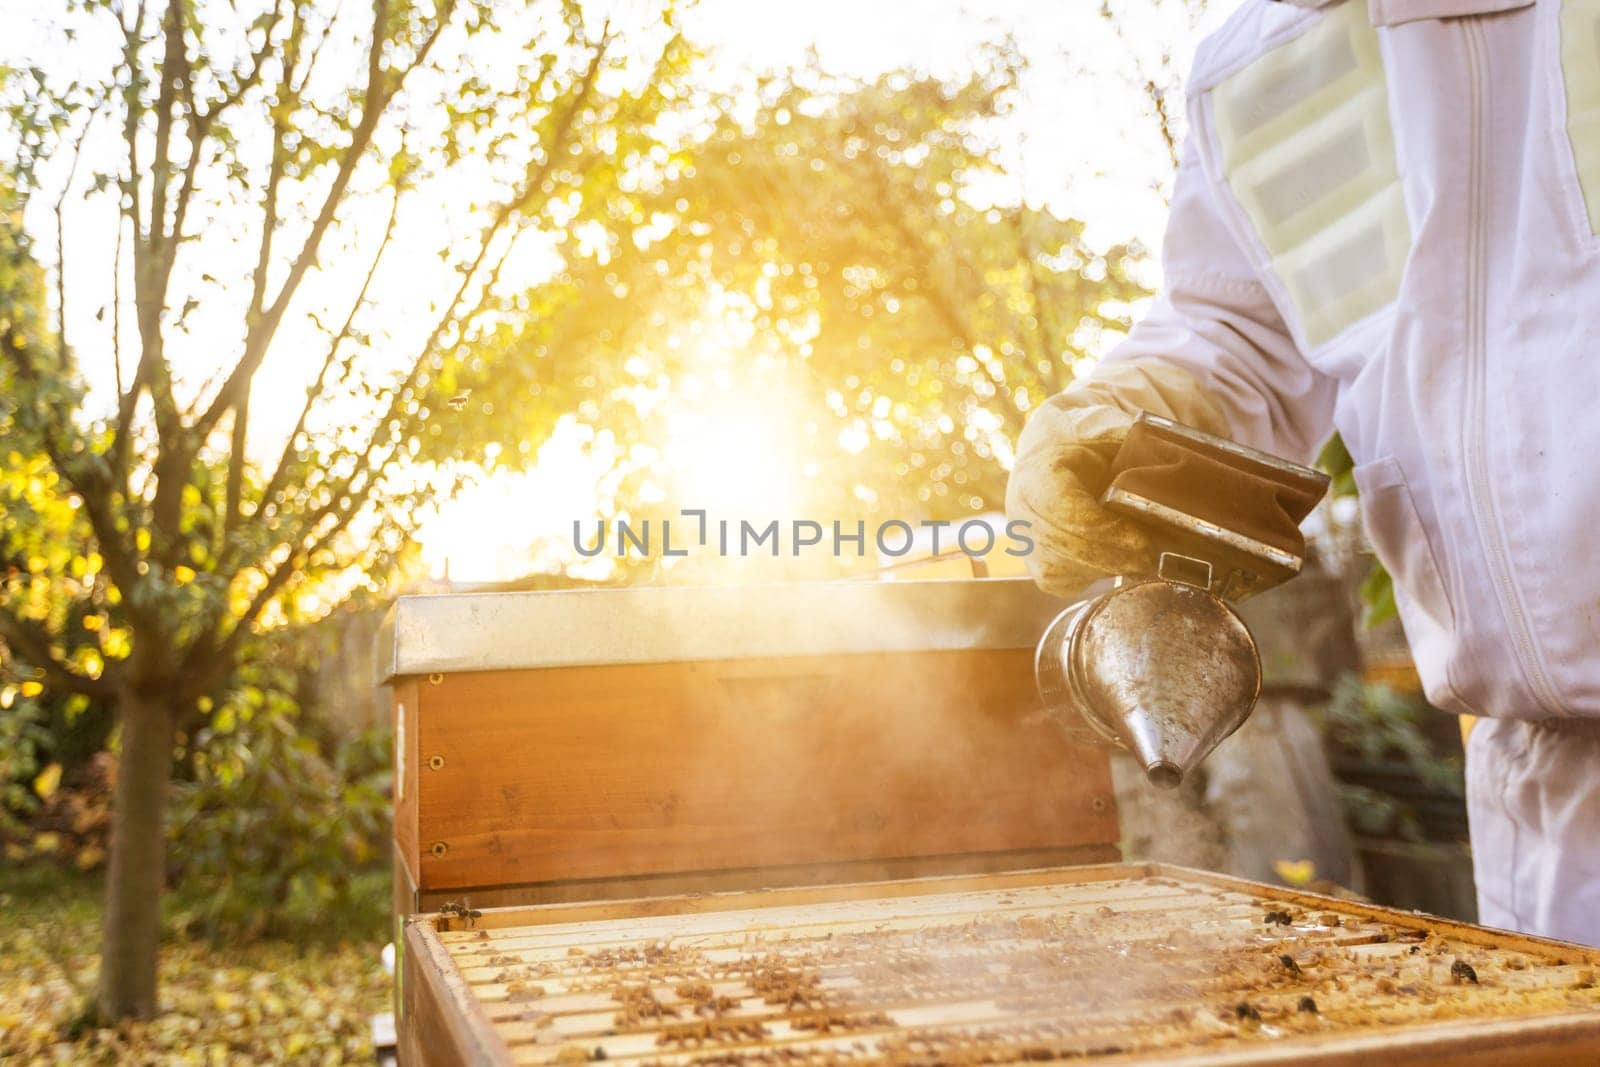 Beekeeper on an apiary, beekeeper is working with bees and beehives on the apiary, beekeeping or apiculture concept by Kadula